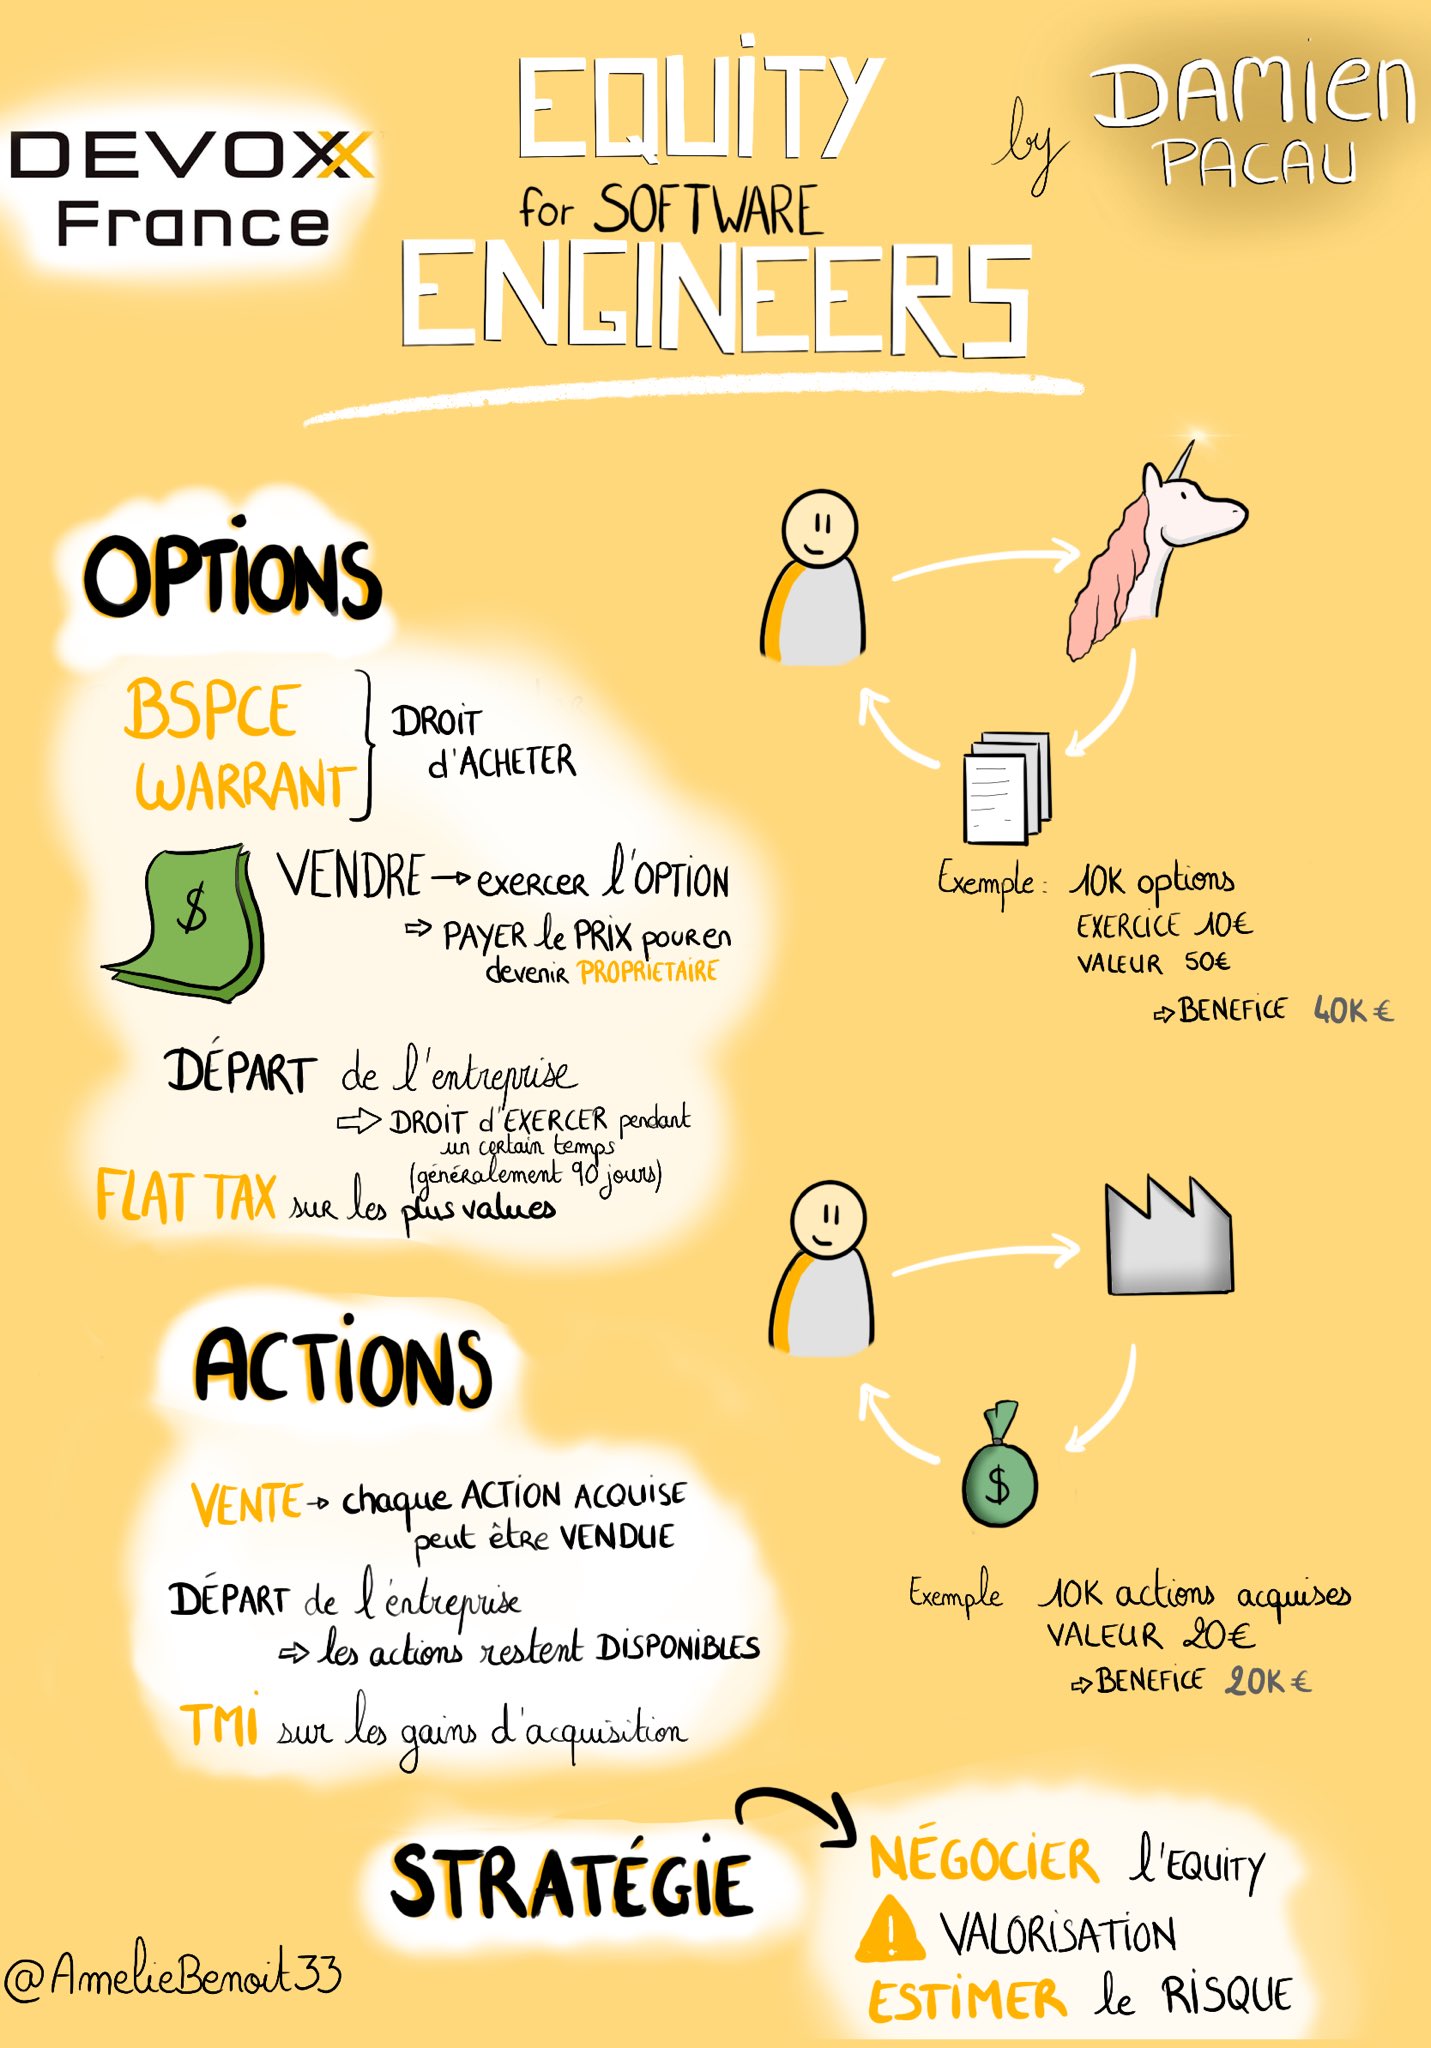 Sketchnote de la conférence "Equity for software engineers"